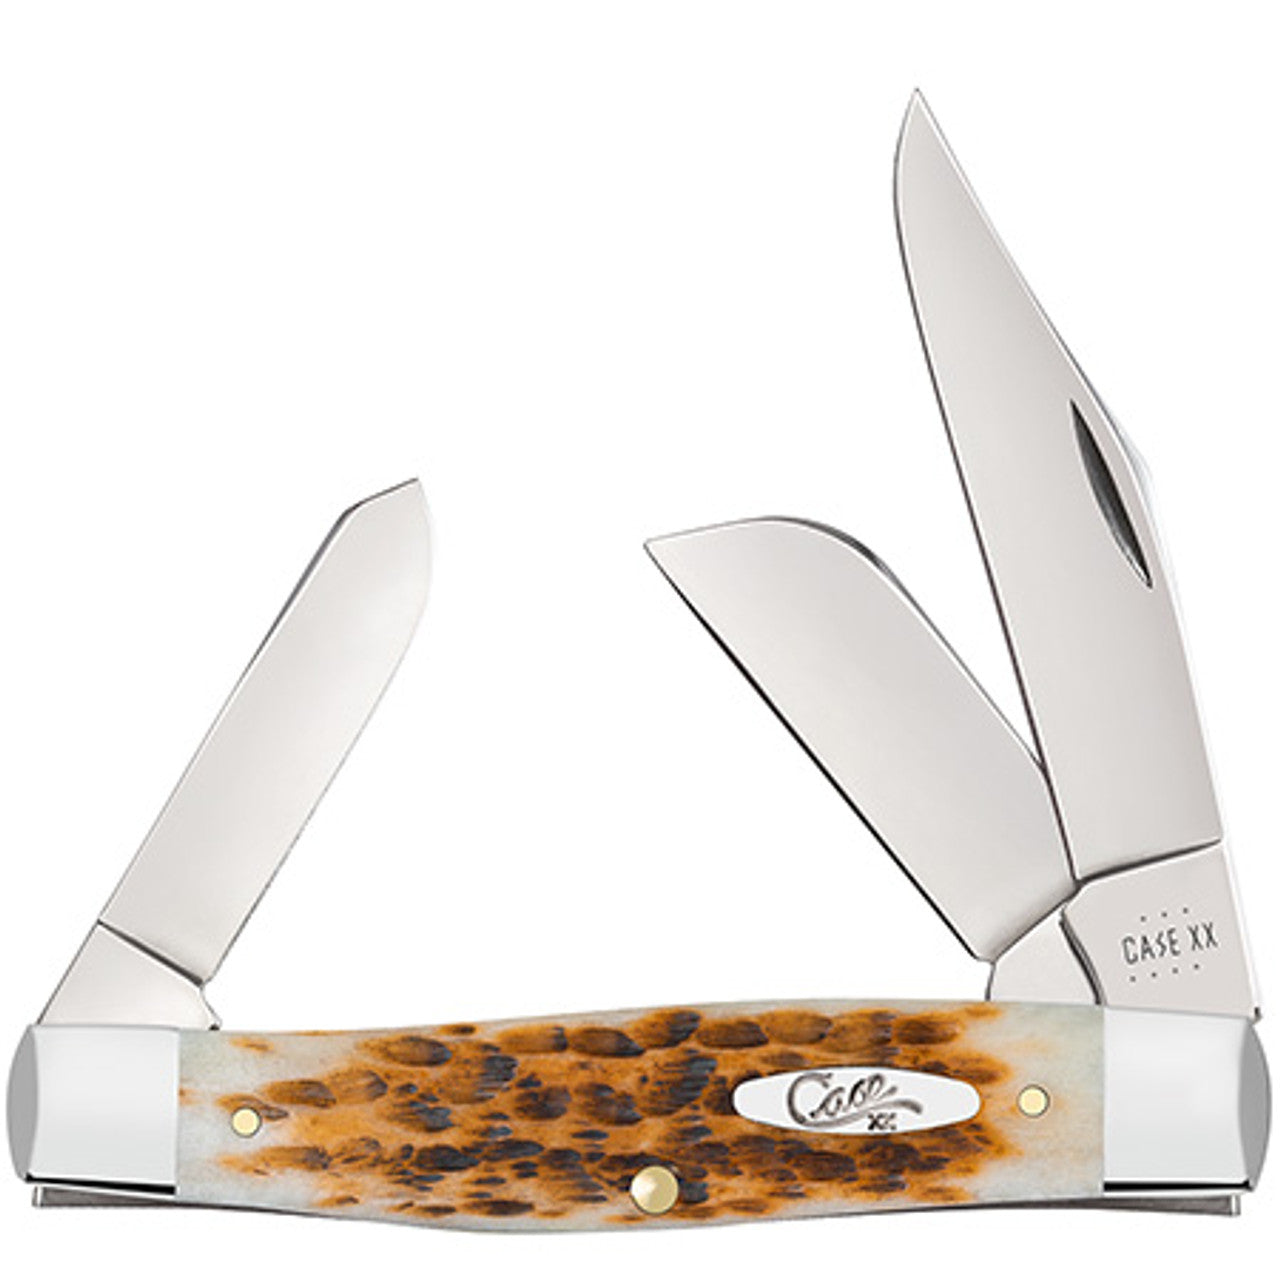 Amber Bone Peach Seed Jig Large Stockman Knives W.R. Case   